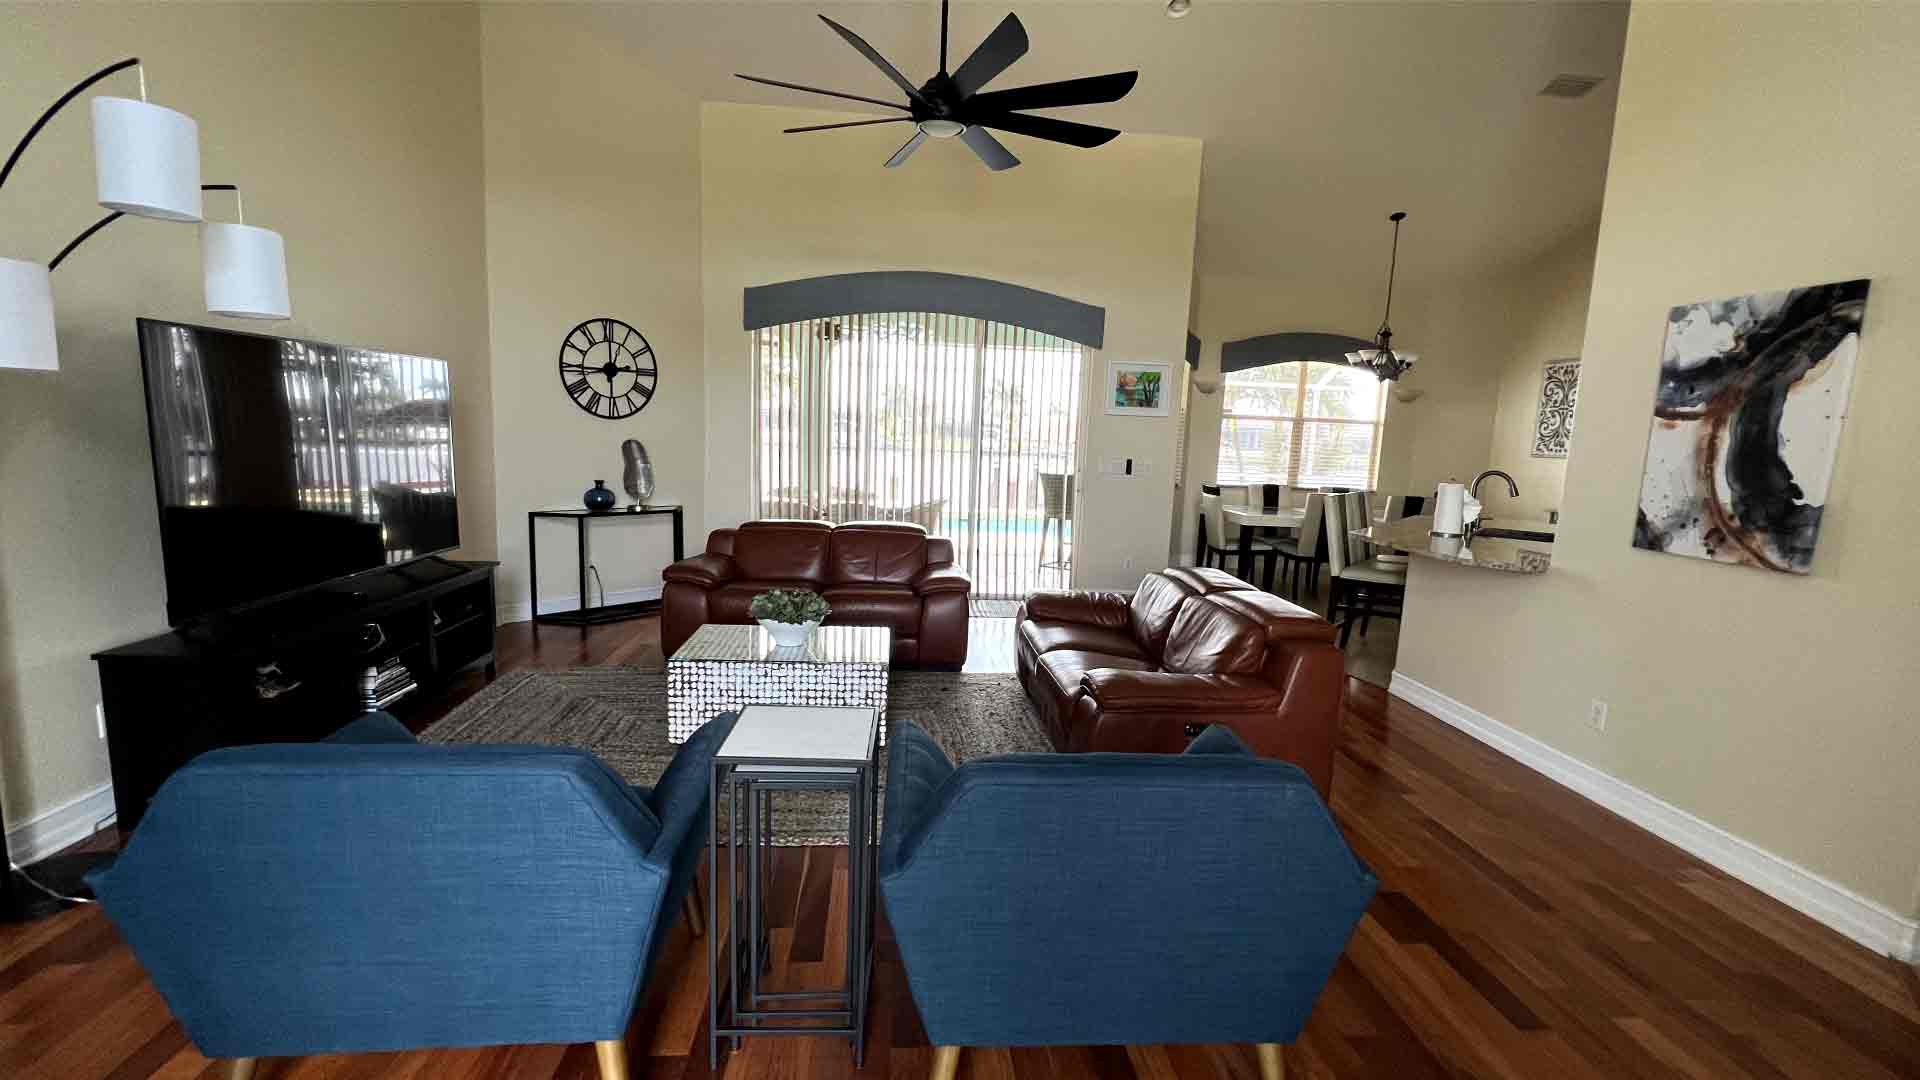 Living room - Regular cleaning in Cape Coral by Goldmillio - May 3